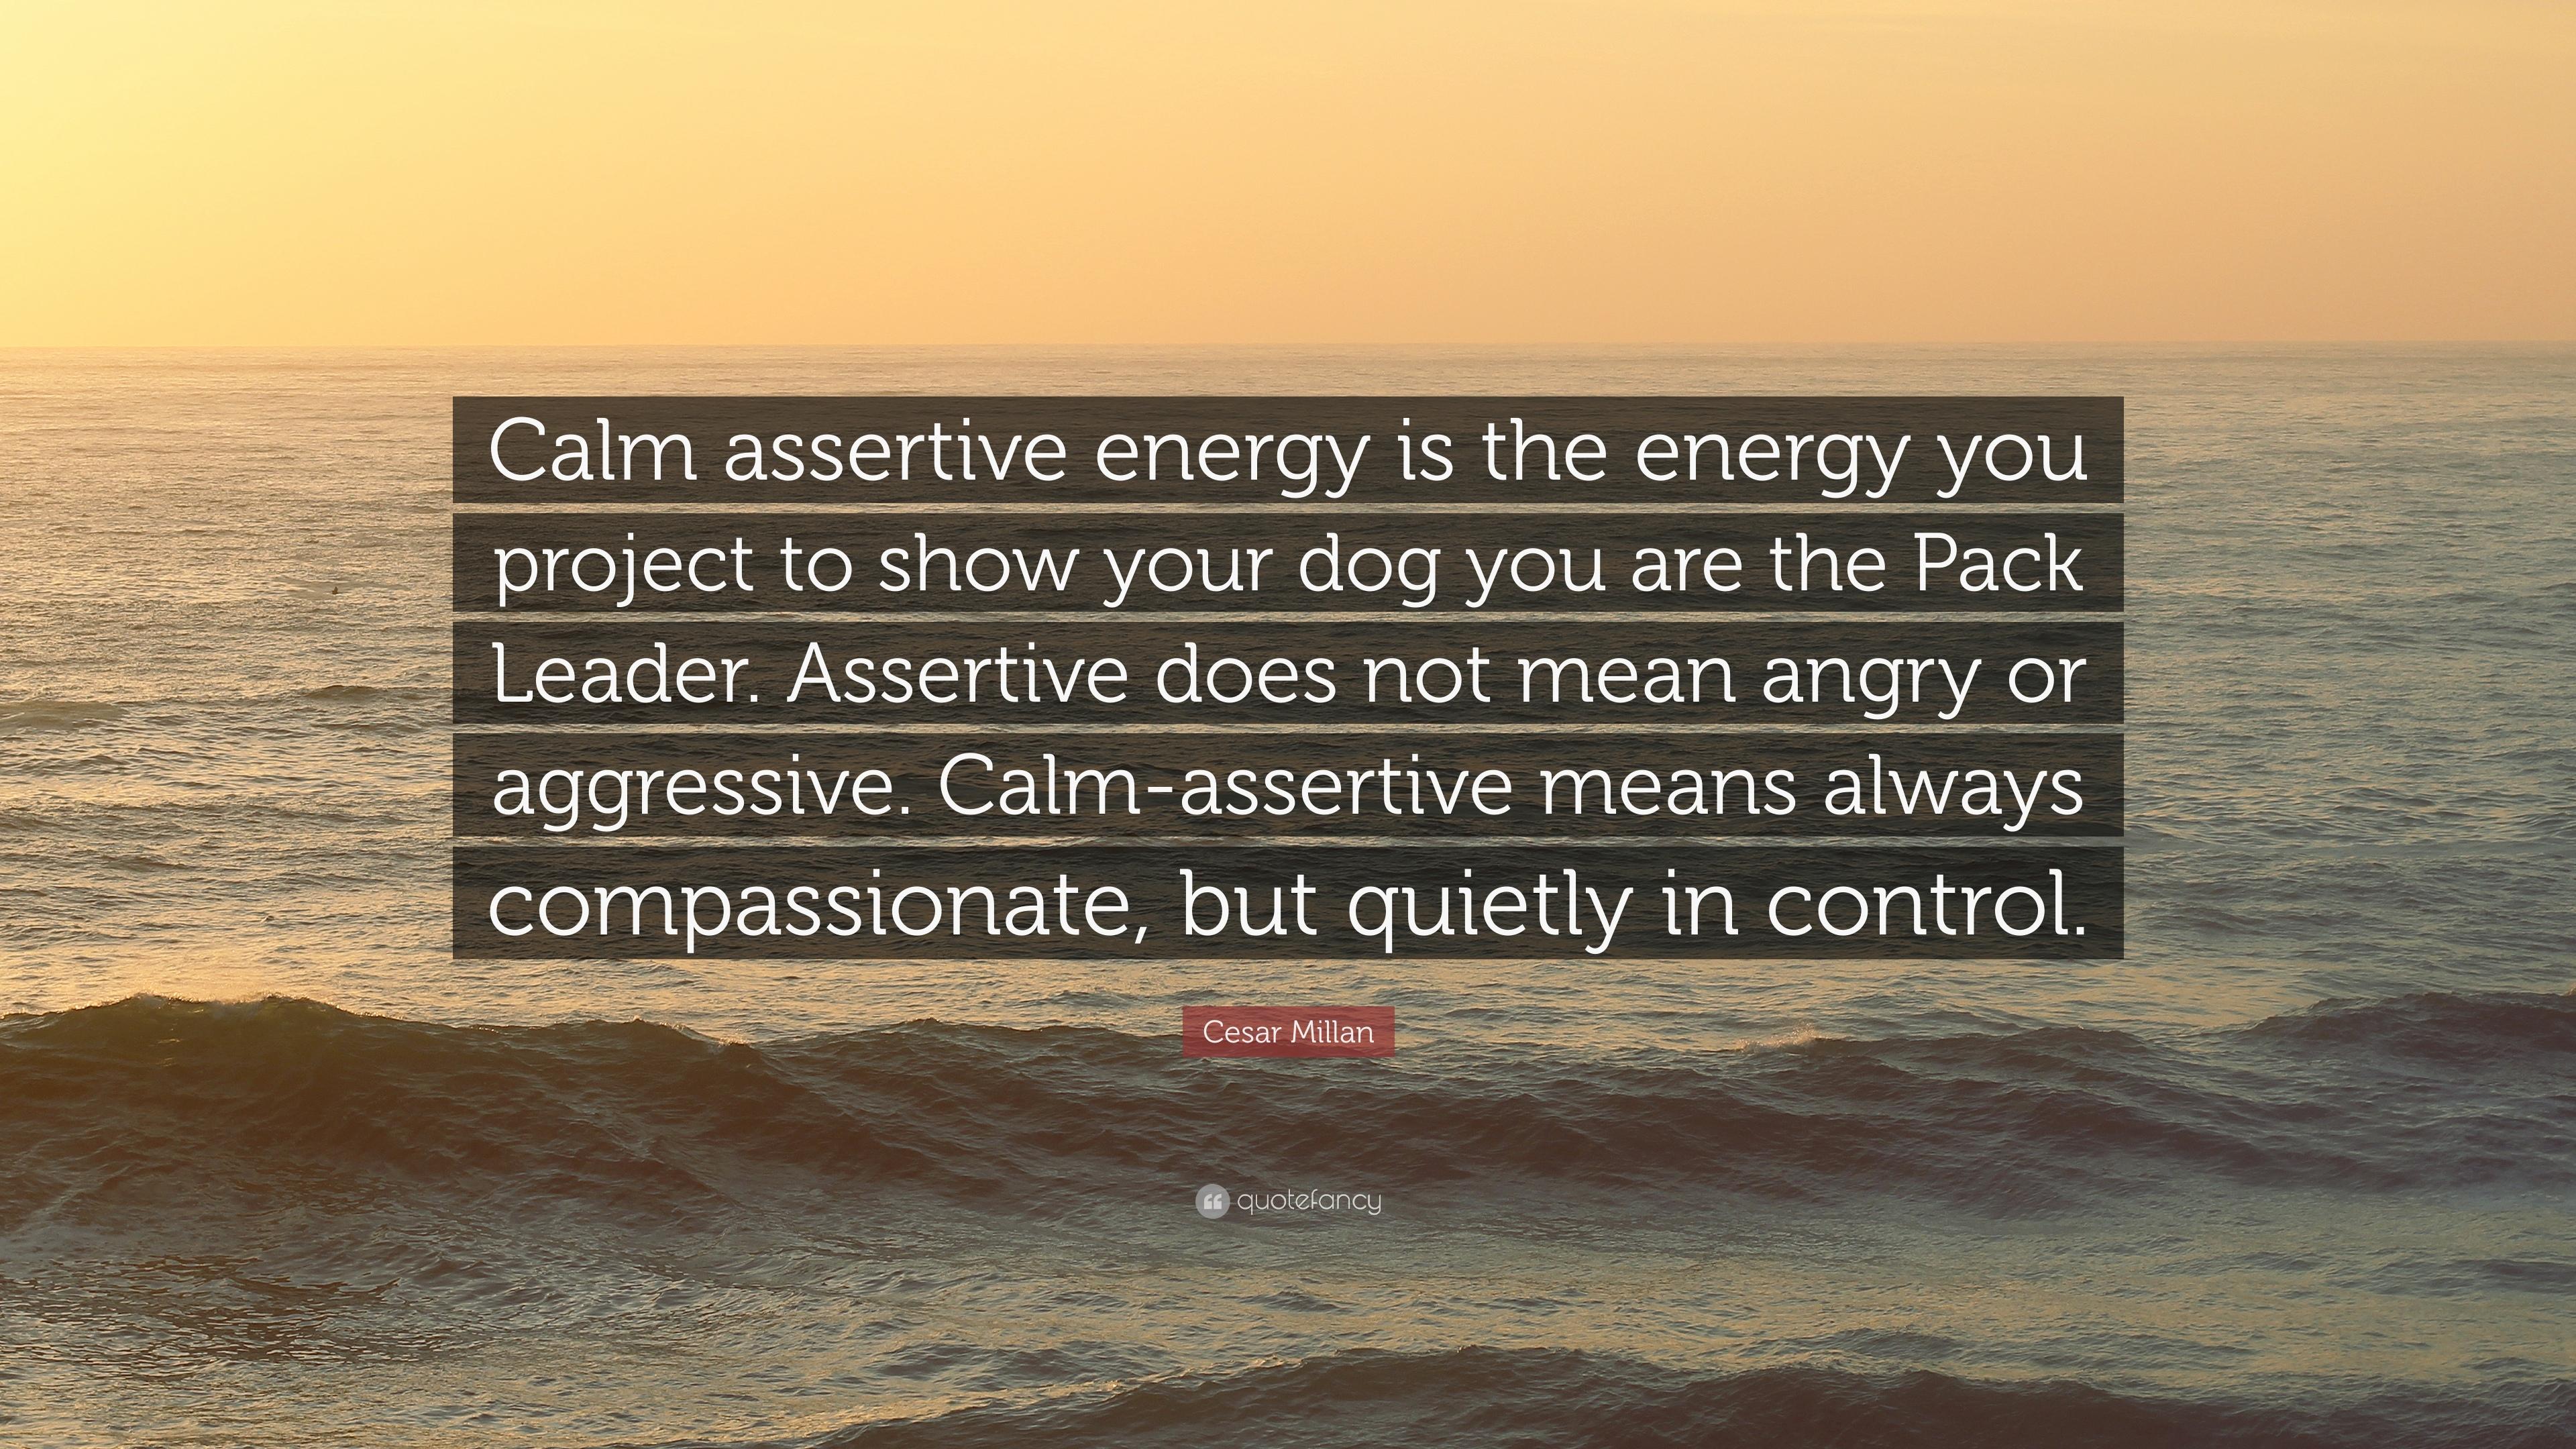 Cesar Millan Quote: “Calm assertive energy is the energy you project